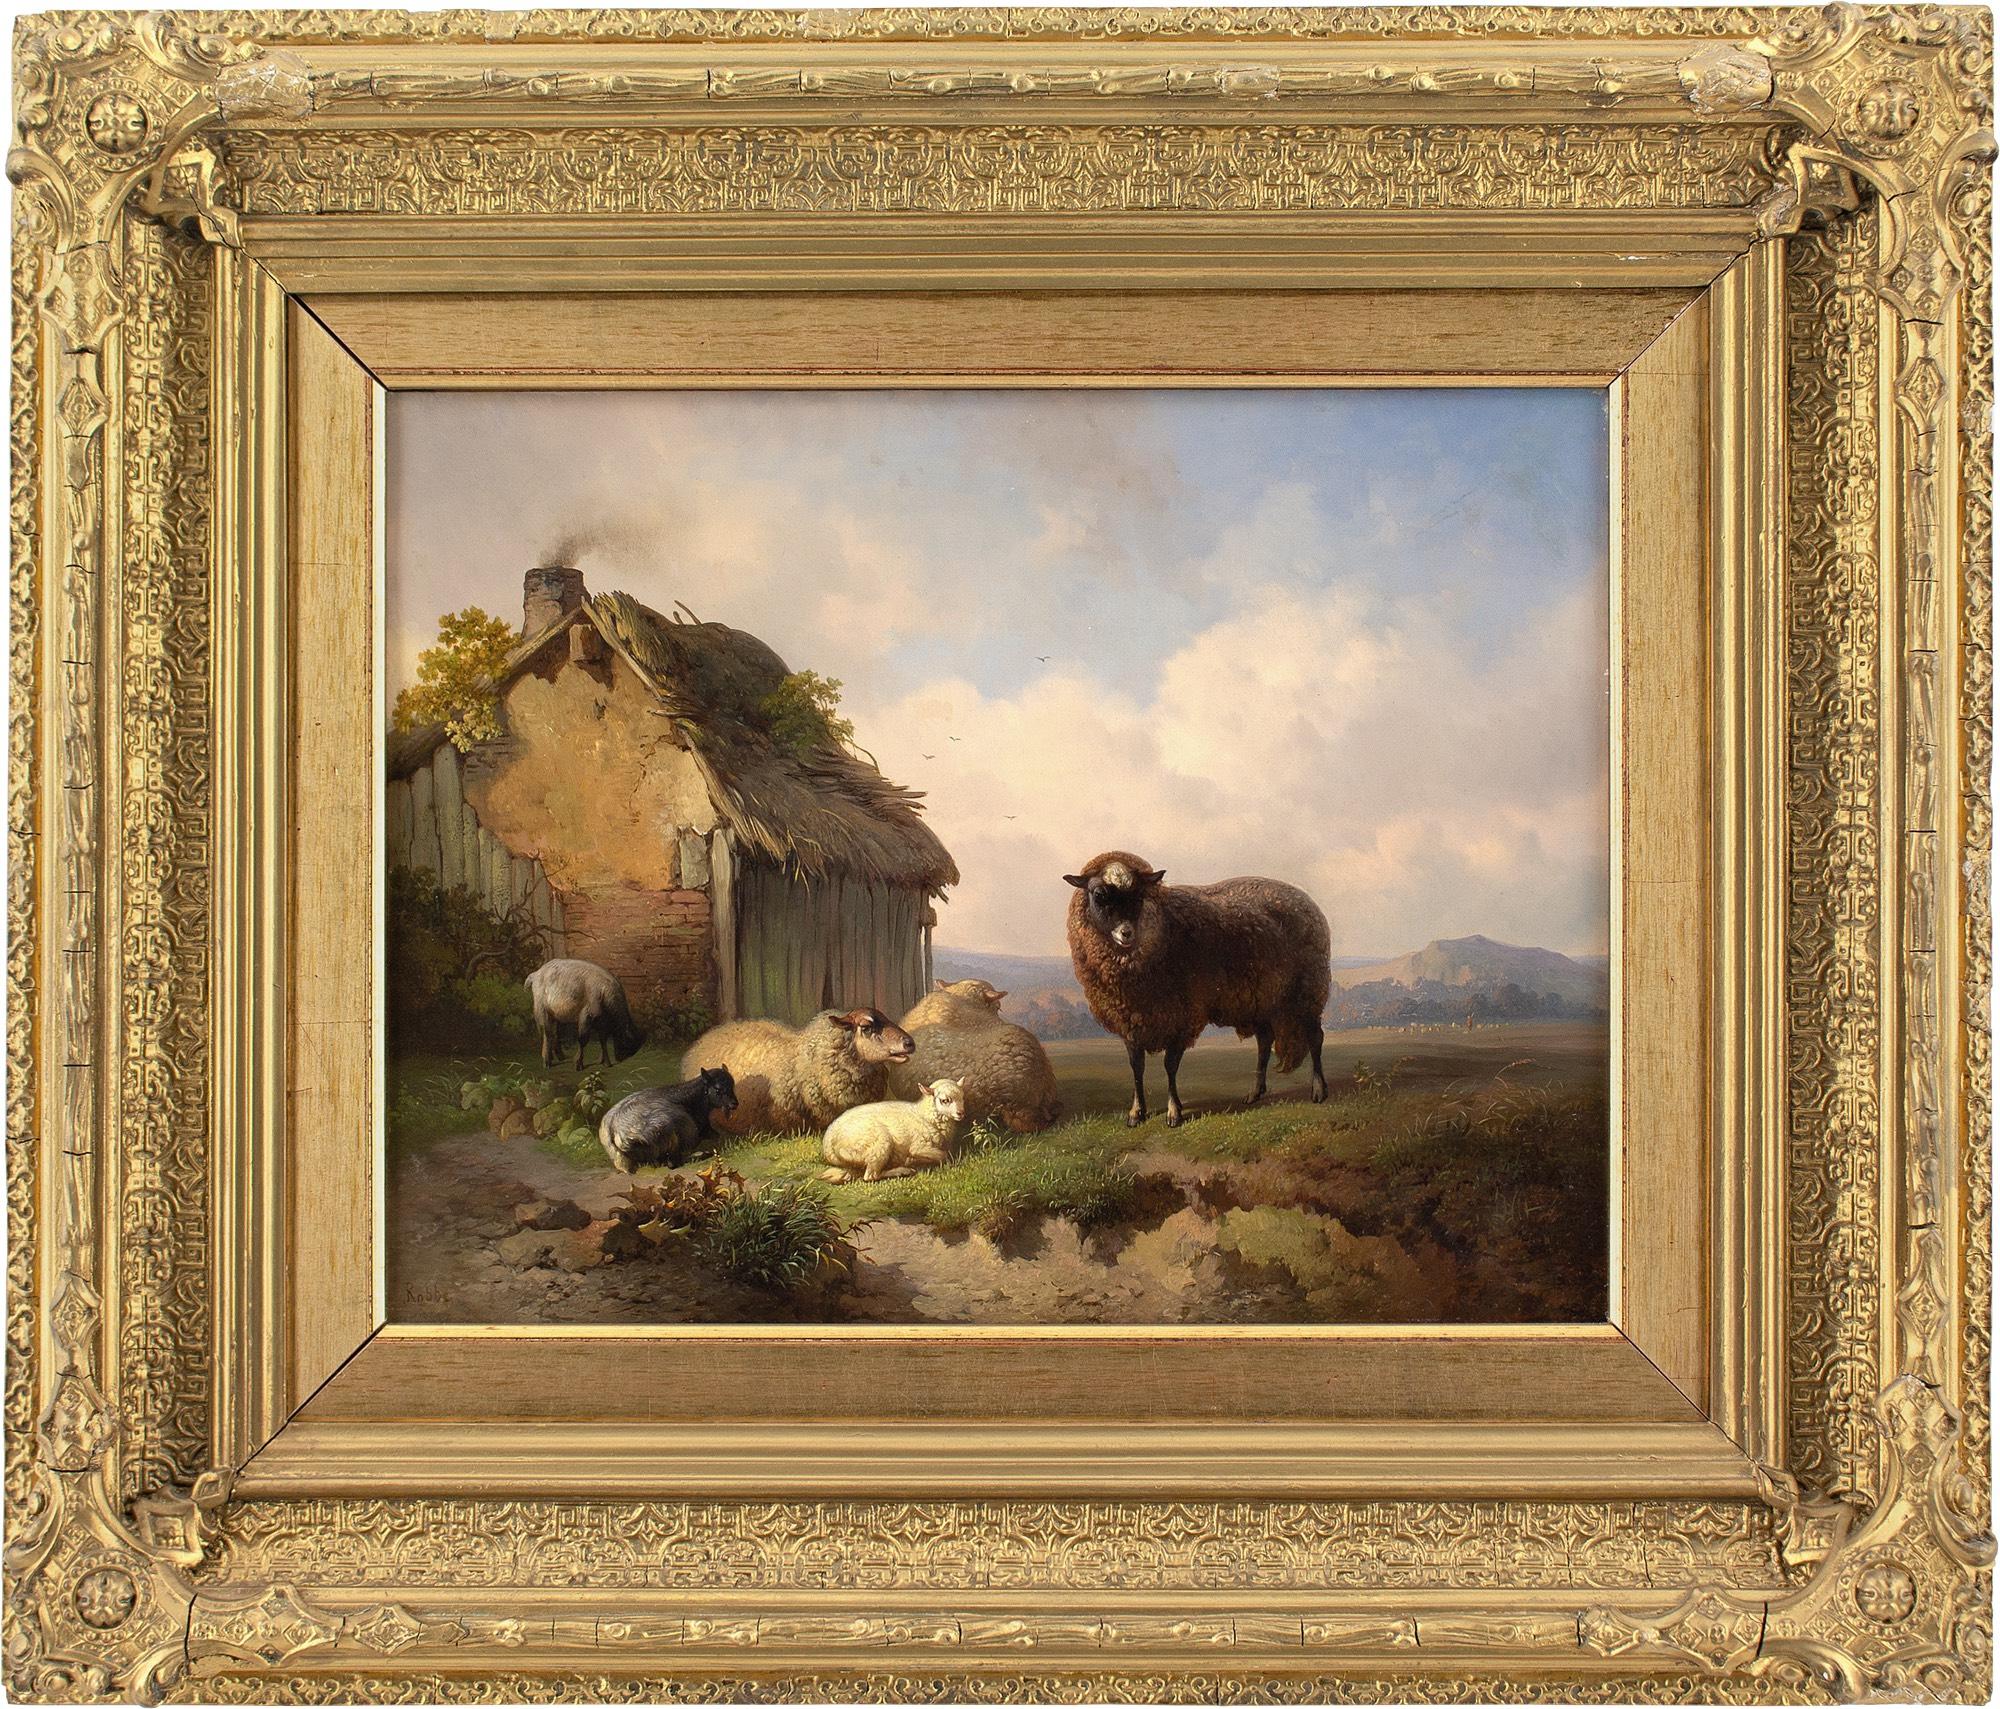 This exquisite mid to late-19th-century oil painting by Belgian artist Louis Robbe (1806-1887) depicts three finely rendered sheep, a lamb and two goats before a landscape with distant hills. It’s a masterful piece.

Louis Robbe was a distinguished